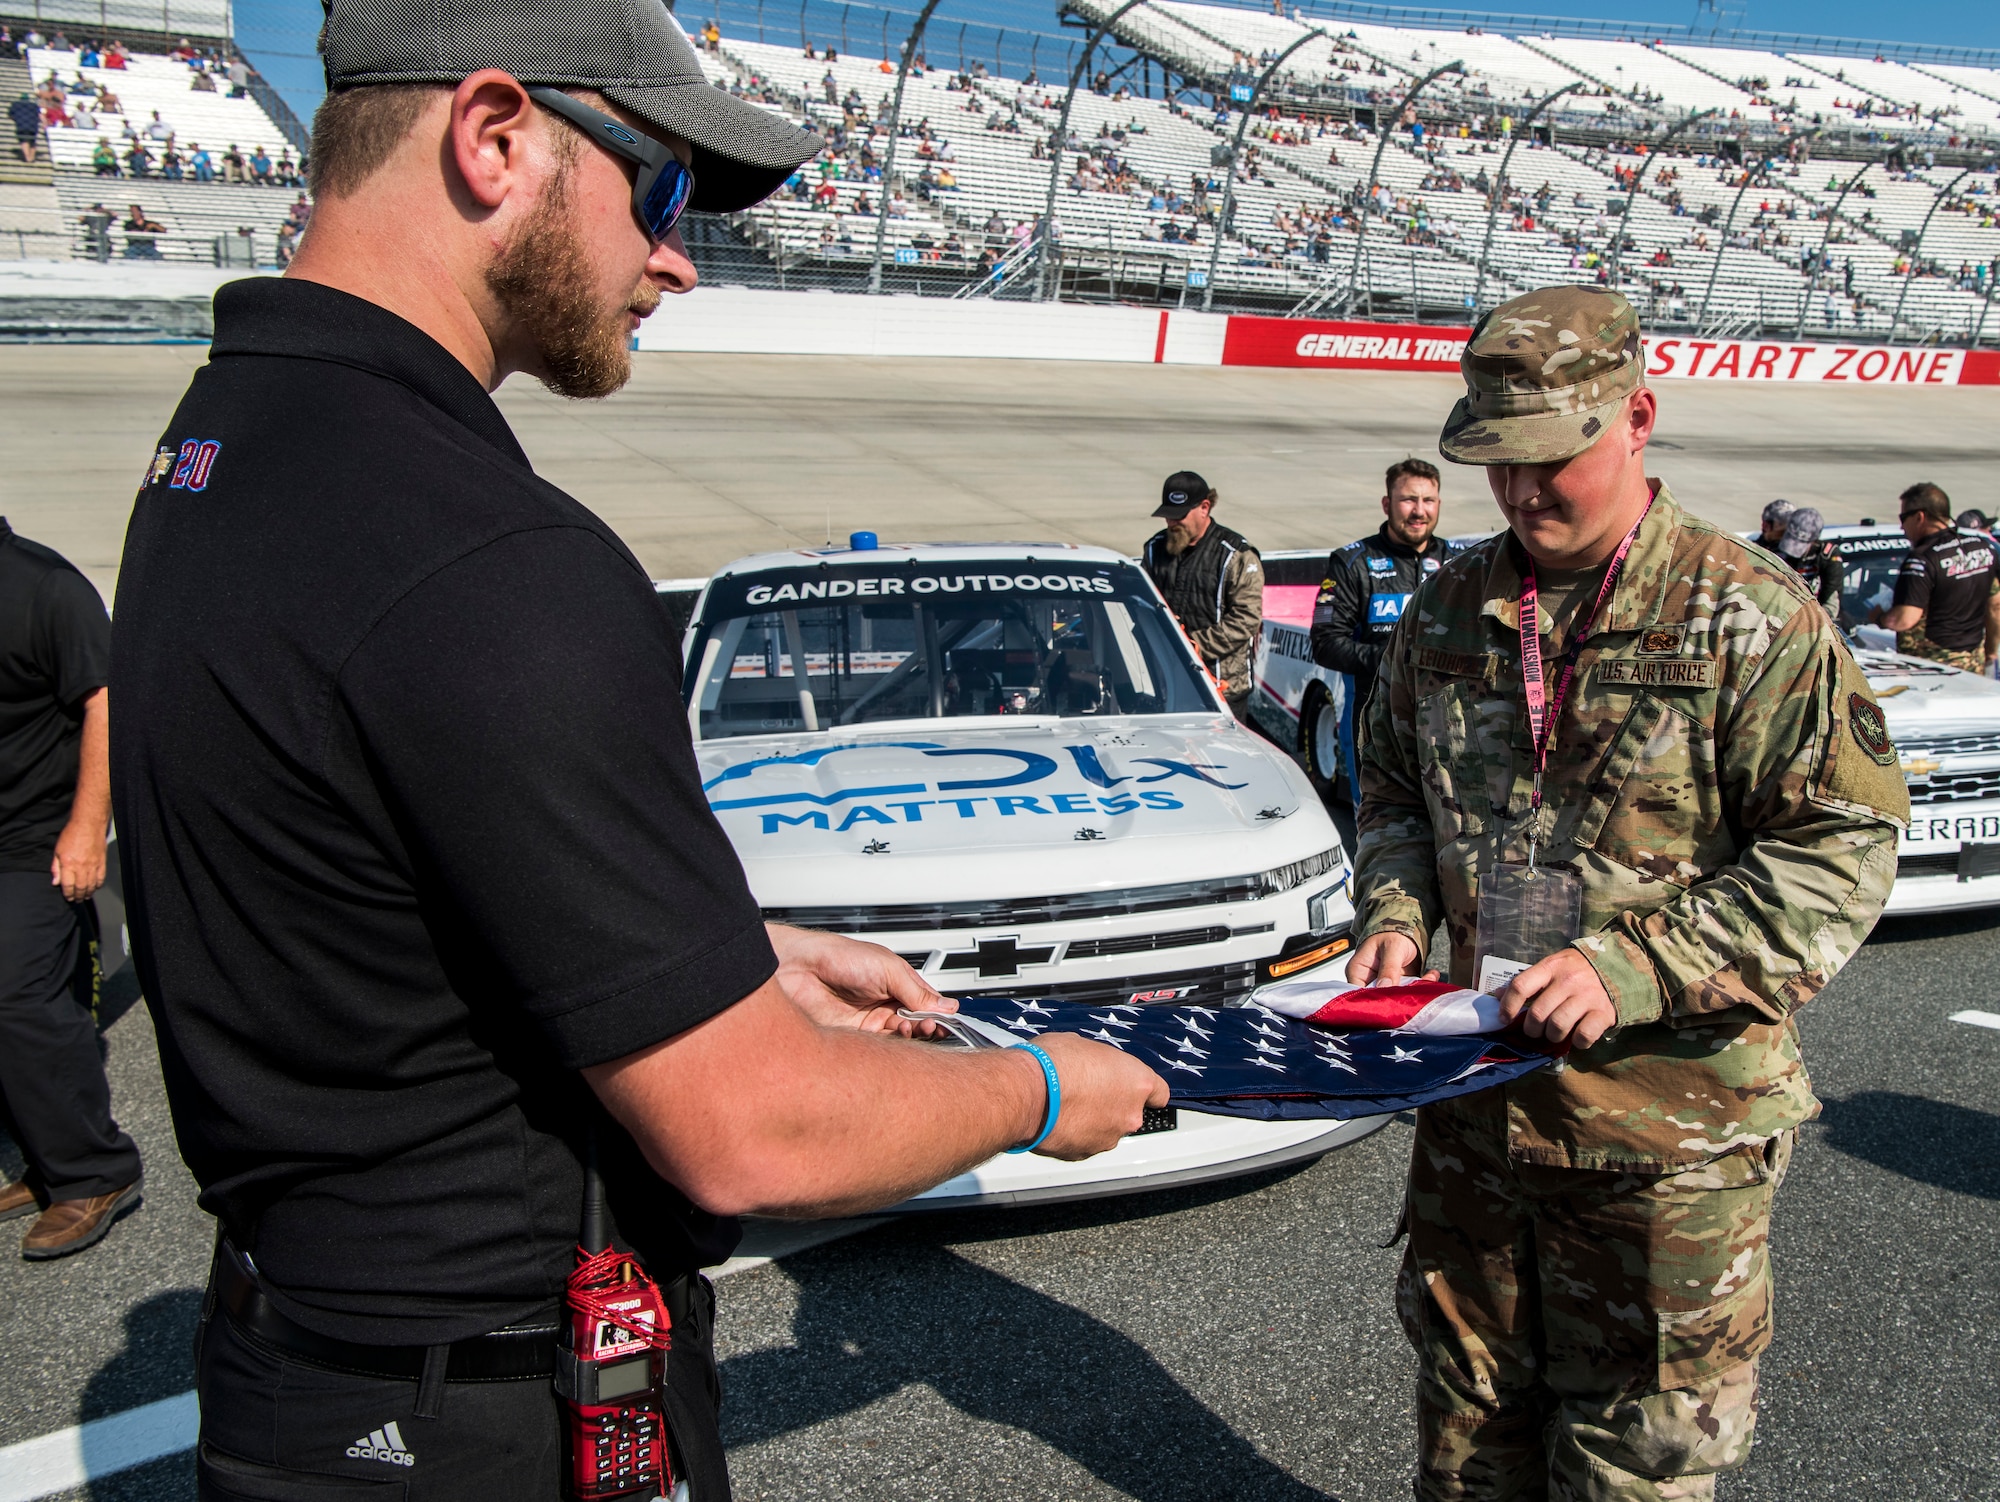 Joshua Aultice, Spencer Boyd Racing Public Relations Manager, and Staff Sgt. Kyle Leidholm, 436th Aircraft Maintenance Squadron C-5 Super Galaxy crew chief, fold an American flag after the National Anthem May 3, 2019, at the Dover International Speedway in Dover, Del. The flag is folded into the shape of a triangle to represent a tri-cornered hat worn by colonial soldiers. This shape is meant to remind race attendees of the freedoms and privileges earned from the sacrifice of many service members. (U.S. Air Force photo by Senior Airman Christopher Quail)